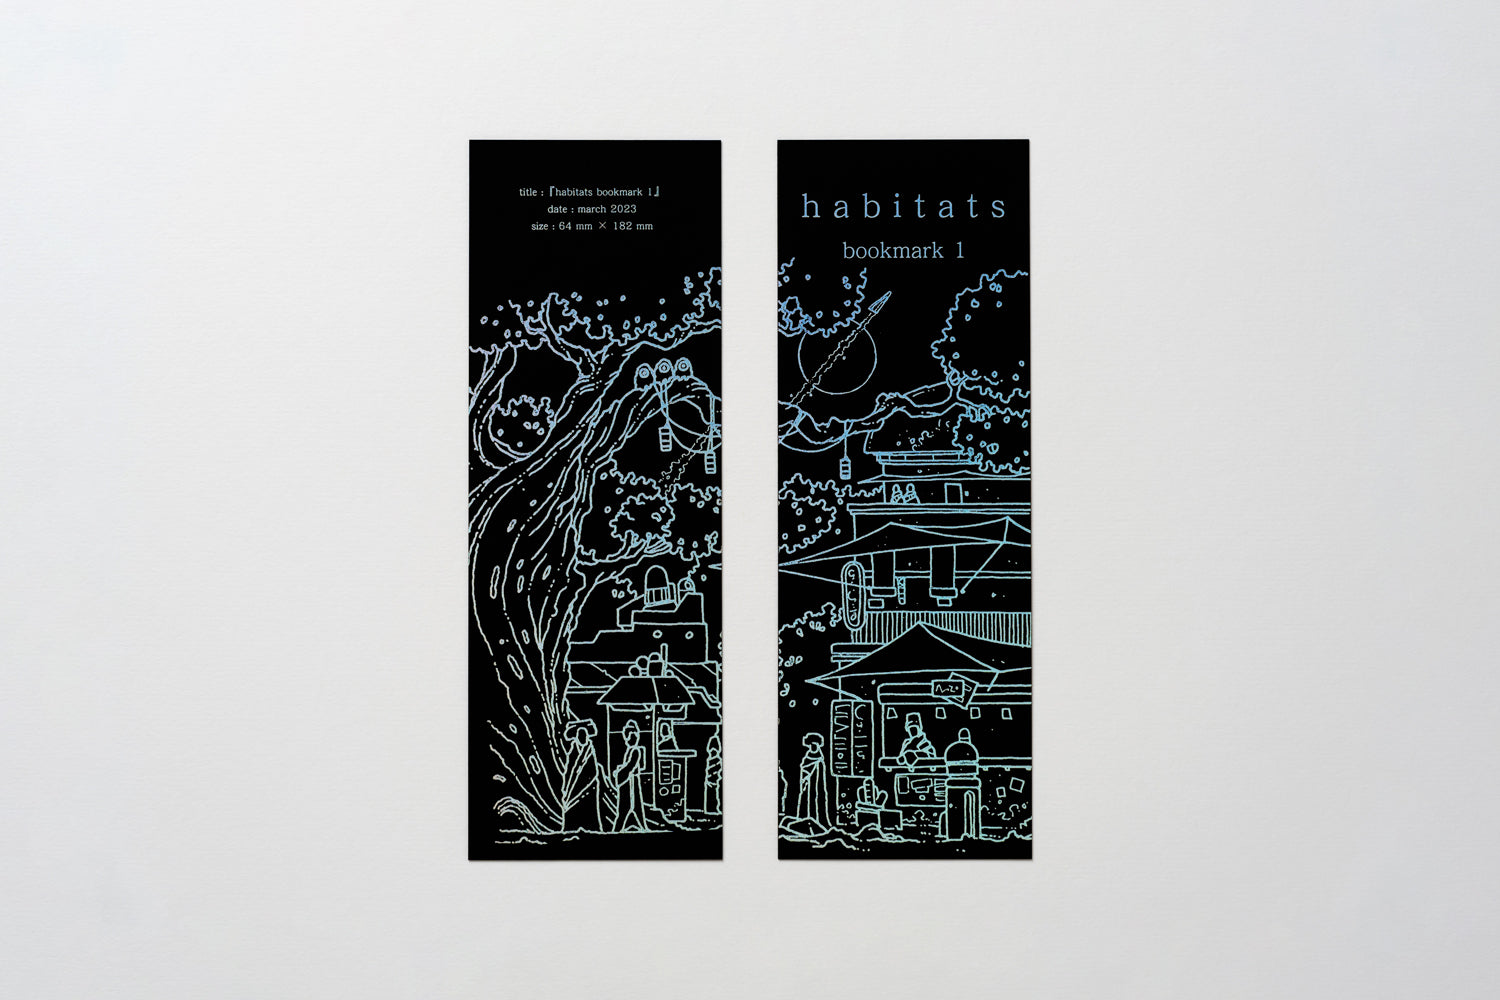 A photo of Habitats Bookmark 1, showing both faces of the bookmark side by side. Small figures stand in front of science-fiction market canopies, with giant trees behind. The illustration, Habitats logo and details text are all printed in holographic foil, on a heavy black paper.